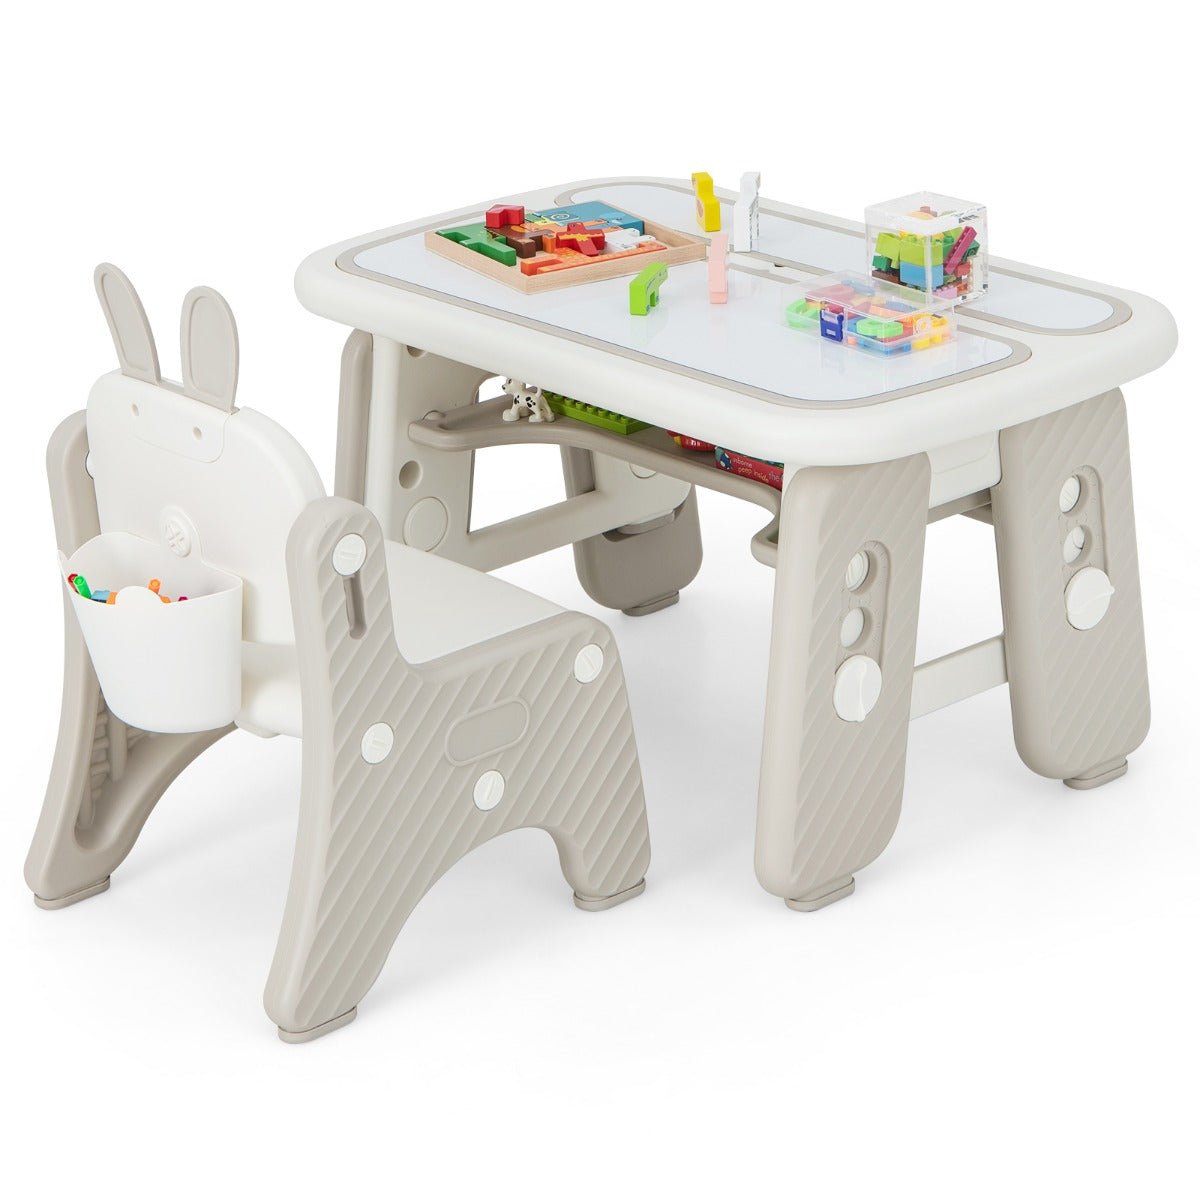 Multi-Activity Kids Table and Chair Set with Flip Top in Grey - Kids Mega Mart